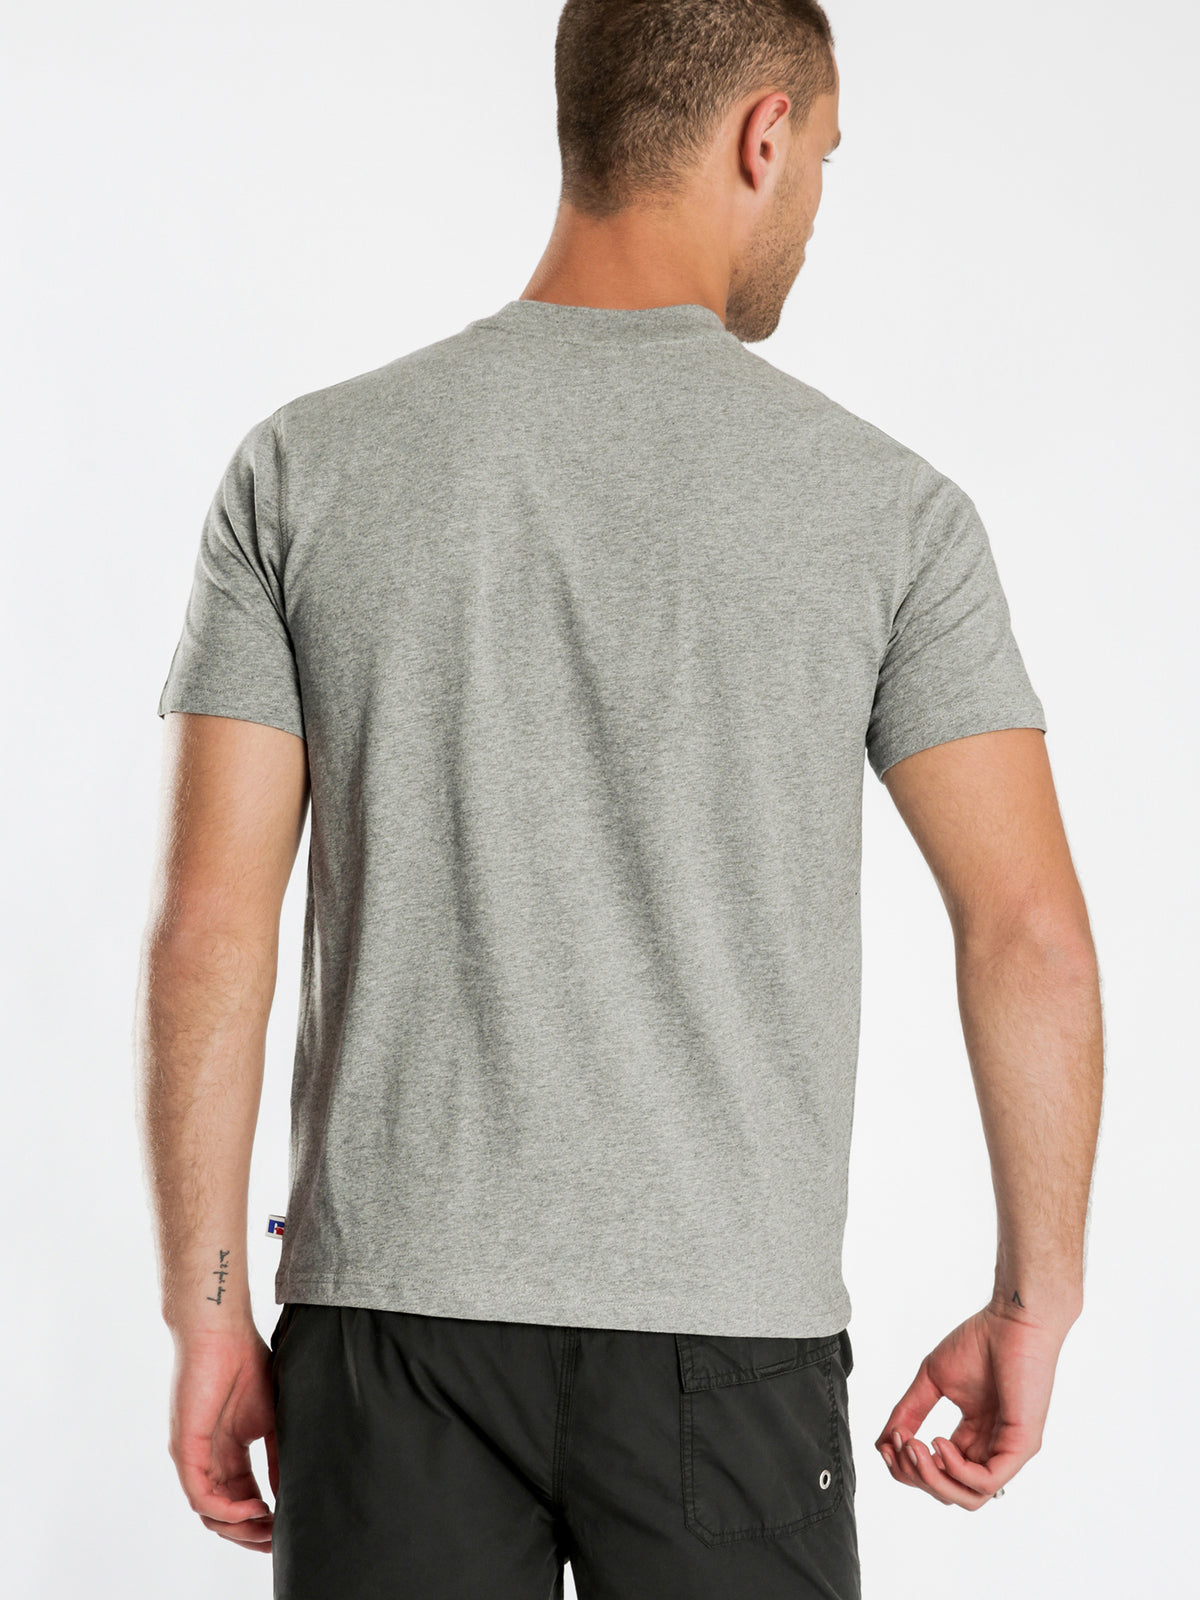 Jerry T-Shirt in Grey